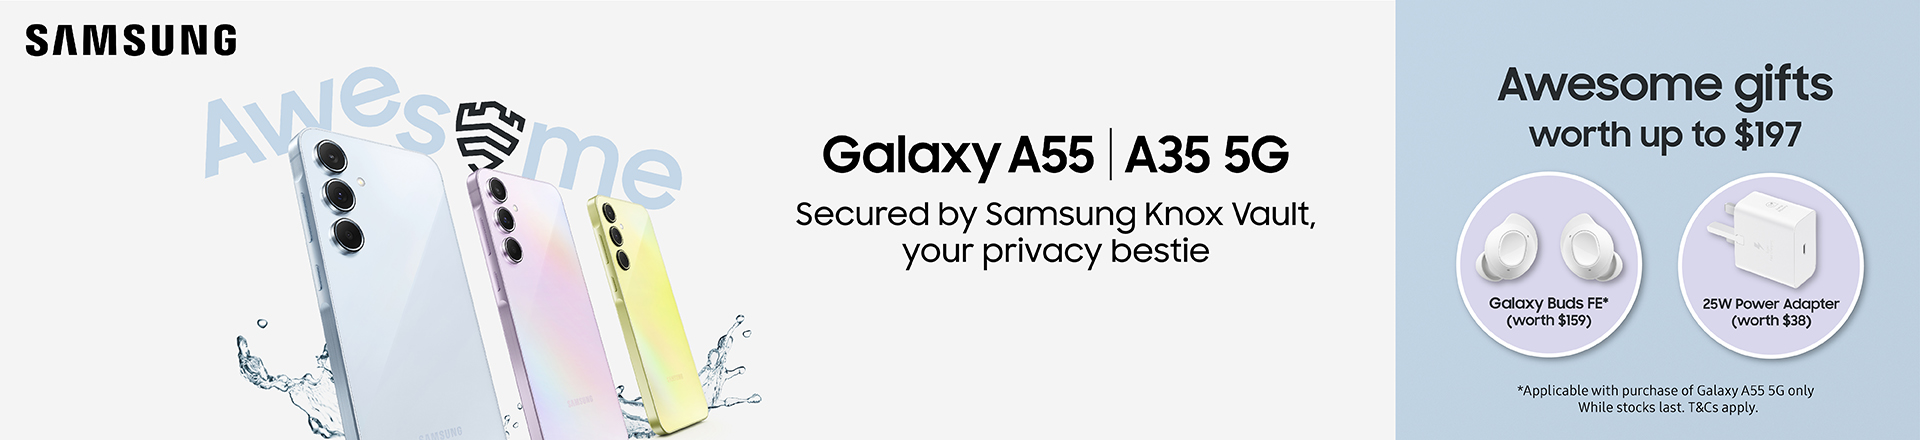 Samsung_a35_a55_Brand_page_SIS_Banner_1920x440px